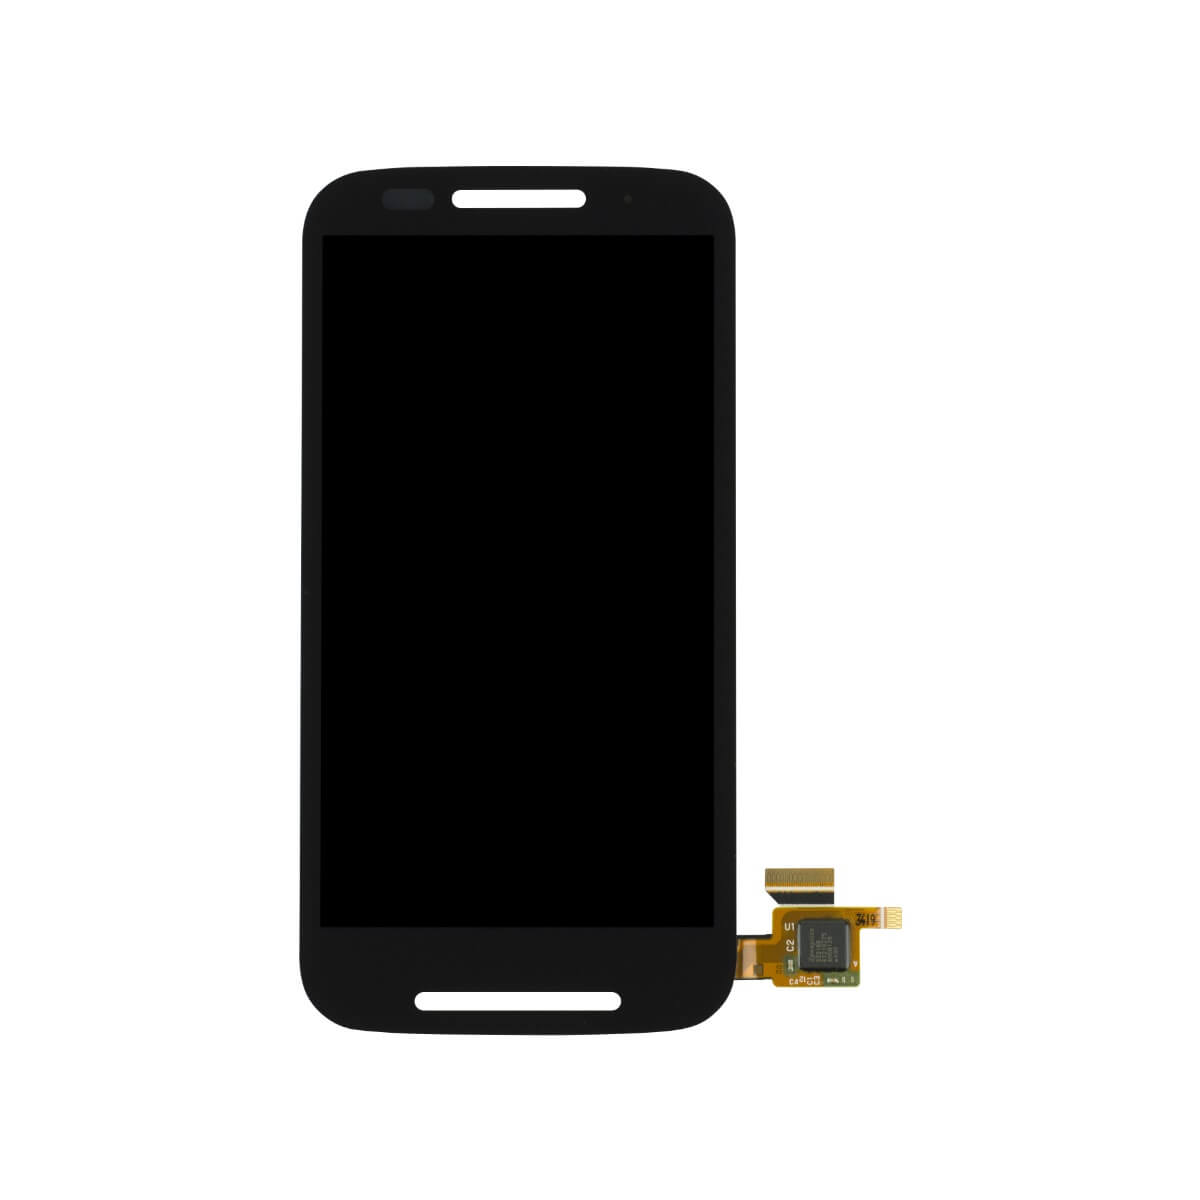 Motorola Moto E Display and Touch Screen Replacement at